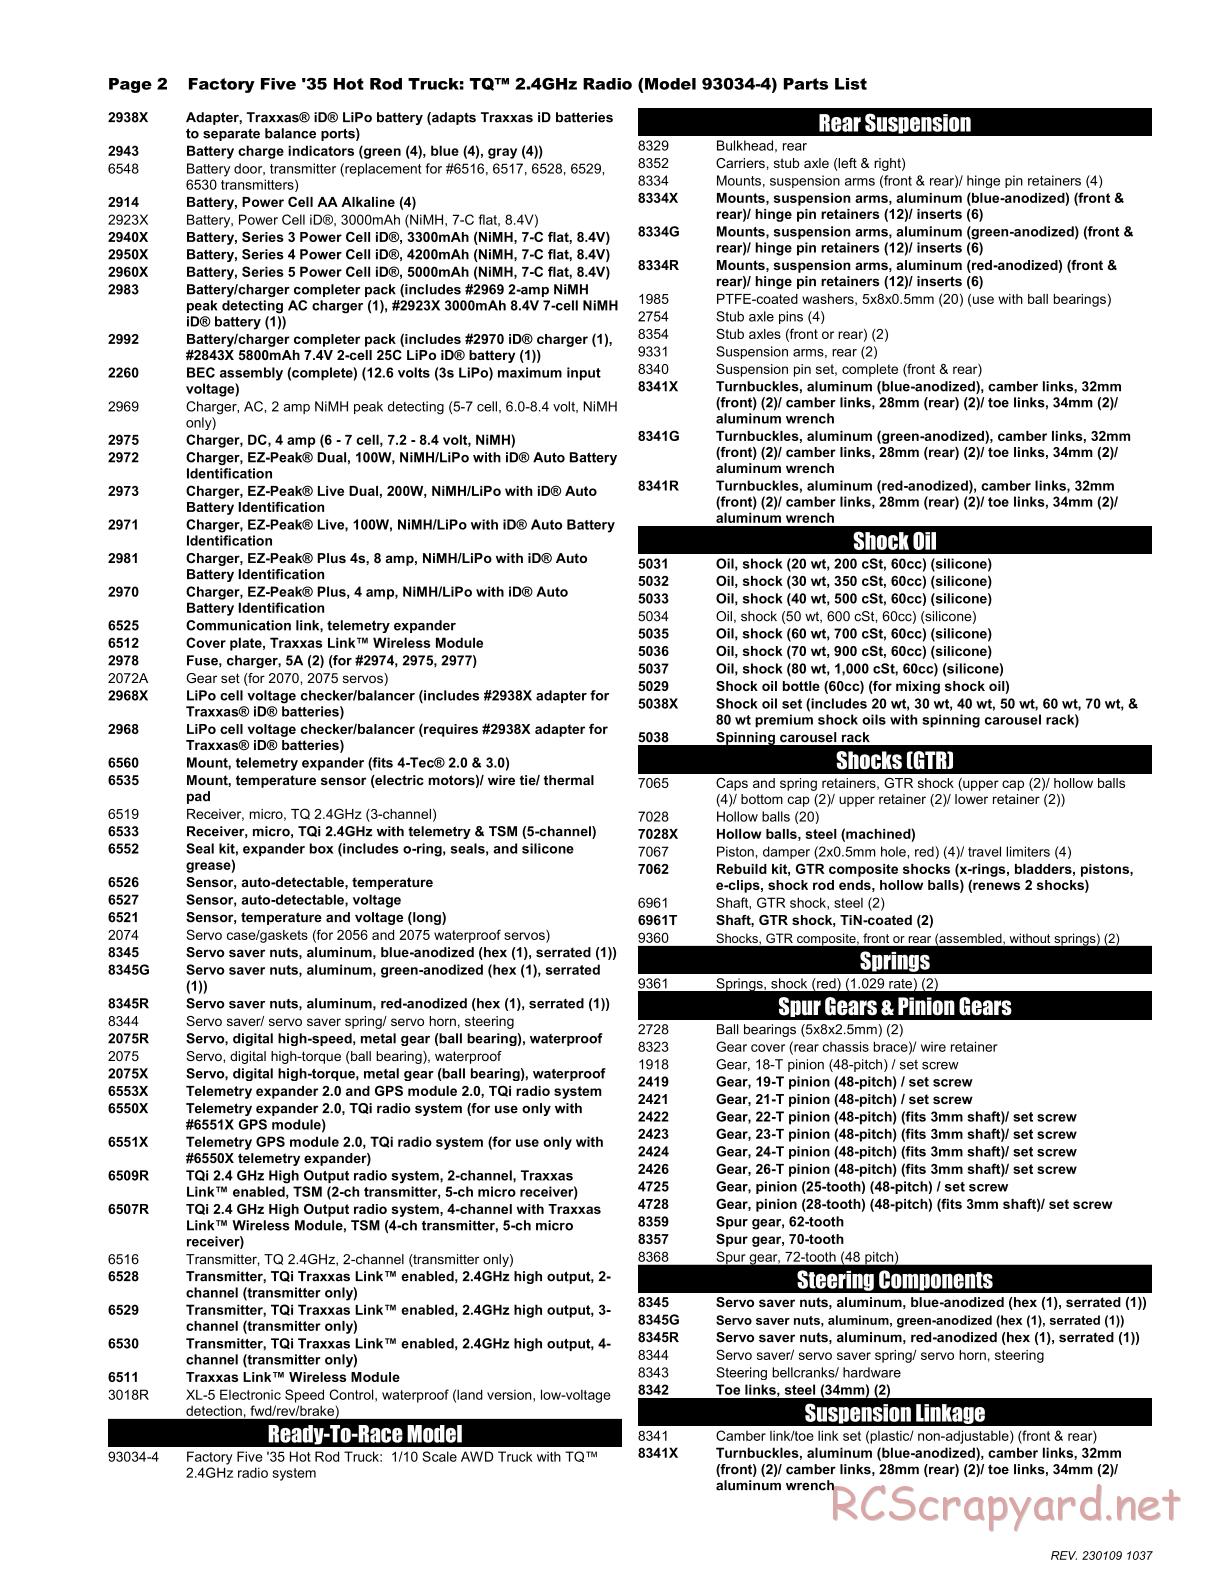 Traxxas - Hot Rod 1935 Truck (2021) - Parts List - Page 2